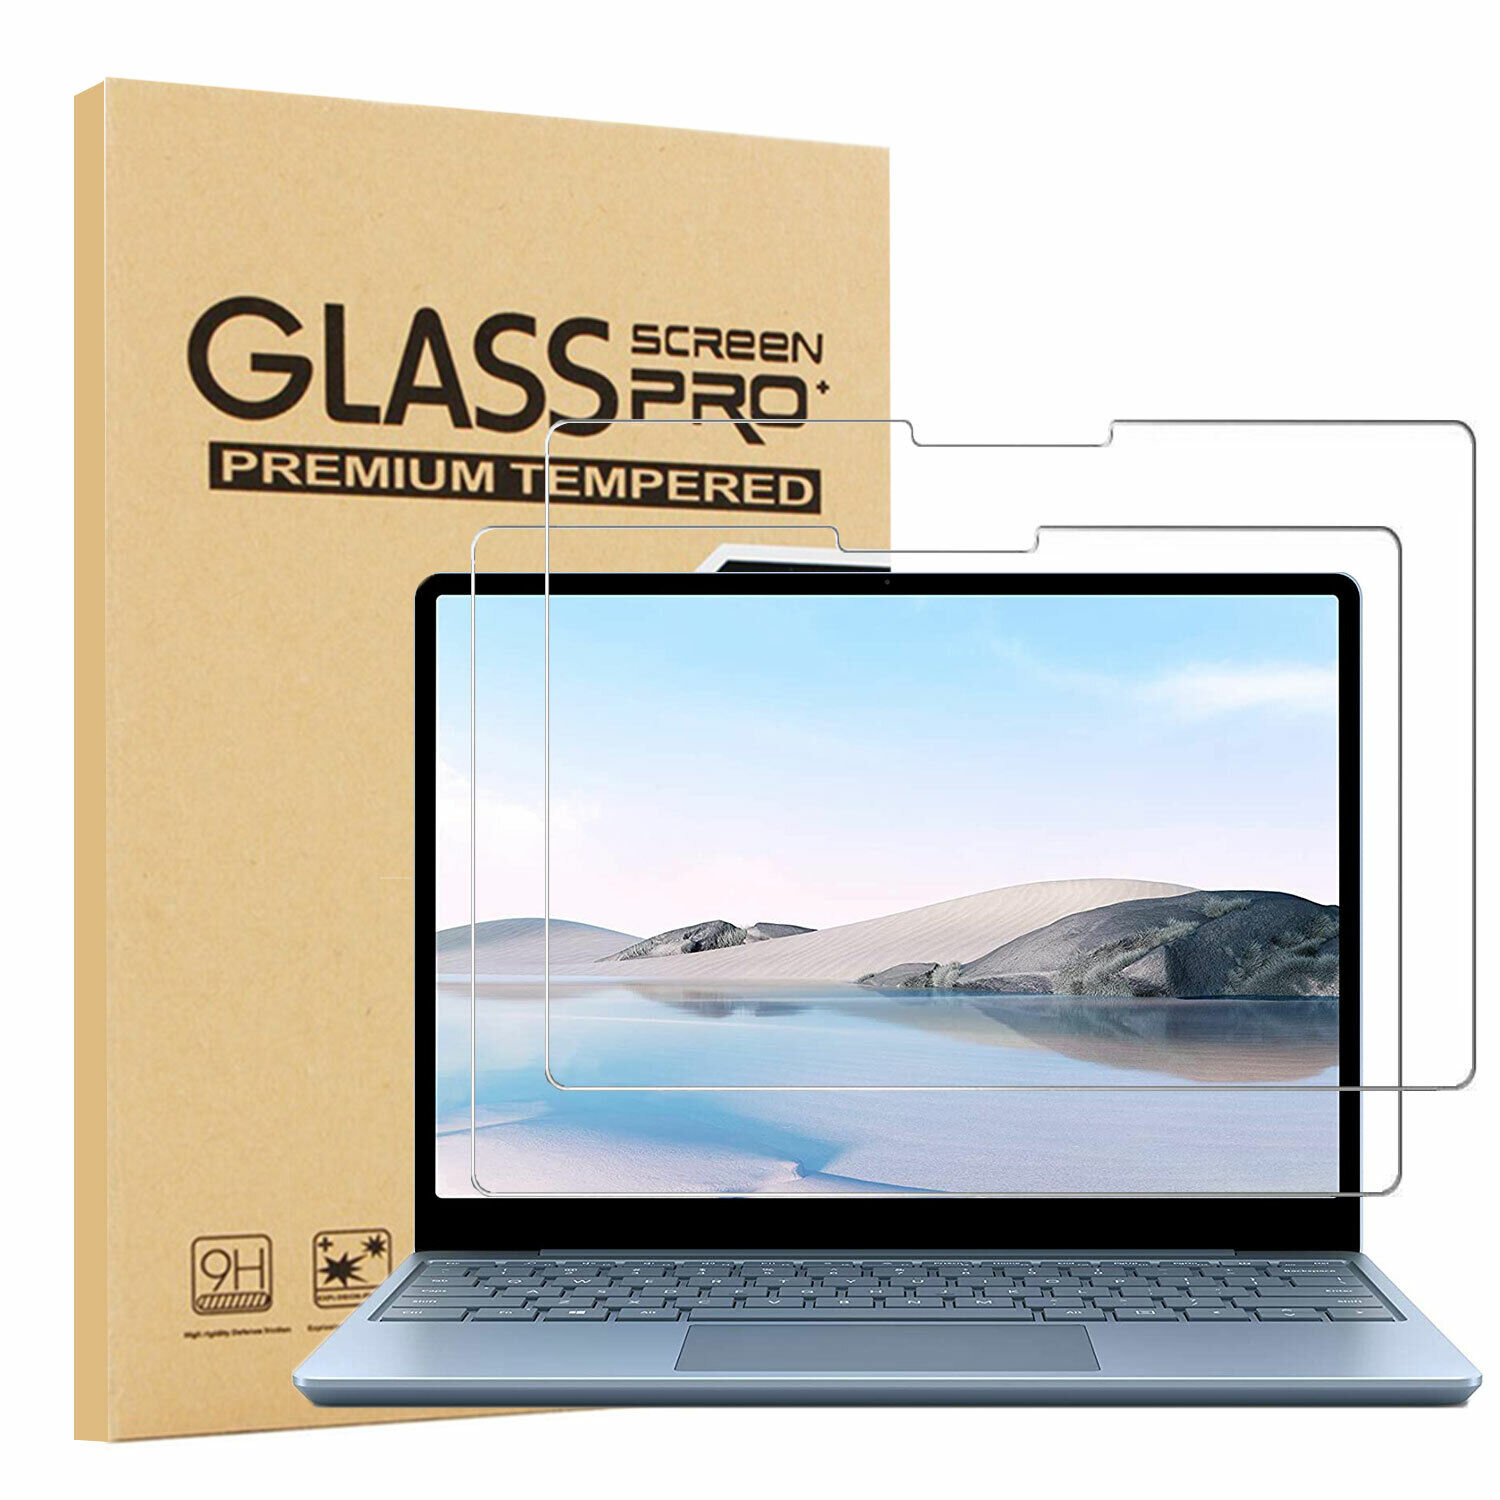 (2 PCS) Tempered Glass Screen Protector For Microsoft Surface Pro Book Laptop Go